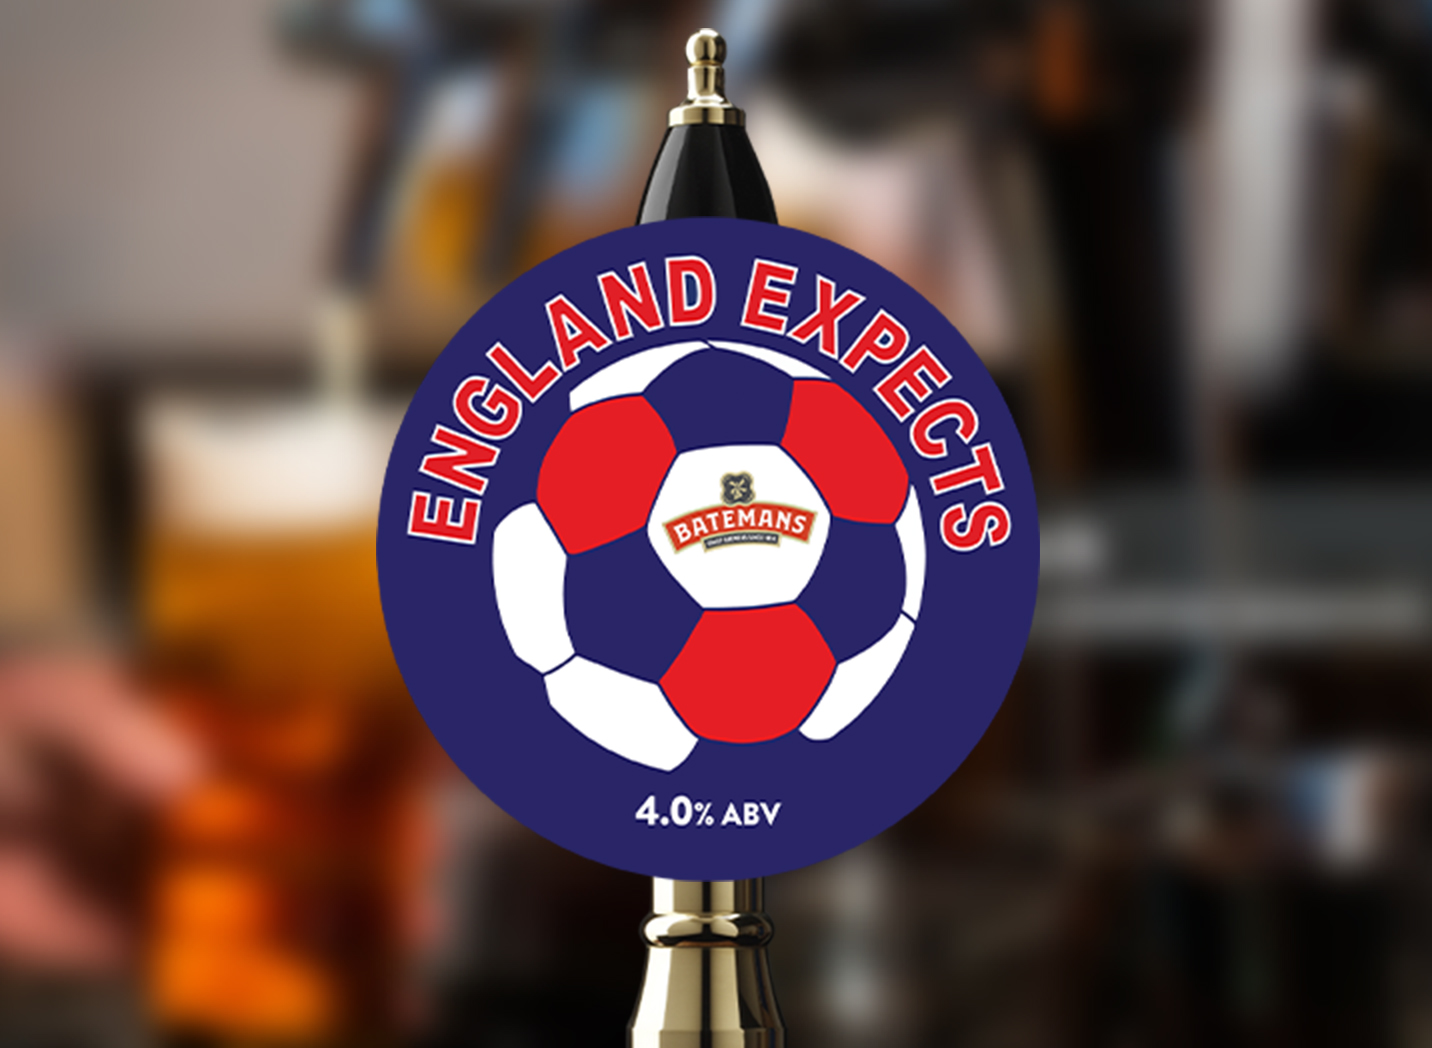 England Expects Beer From Batemans Brewery - Ideal for watching the football